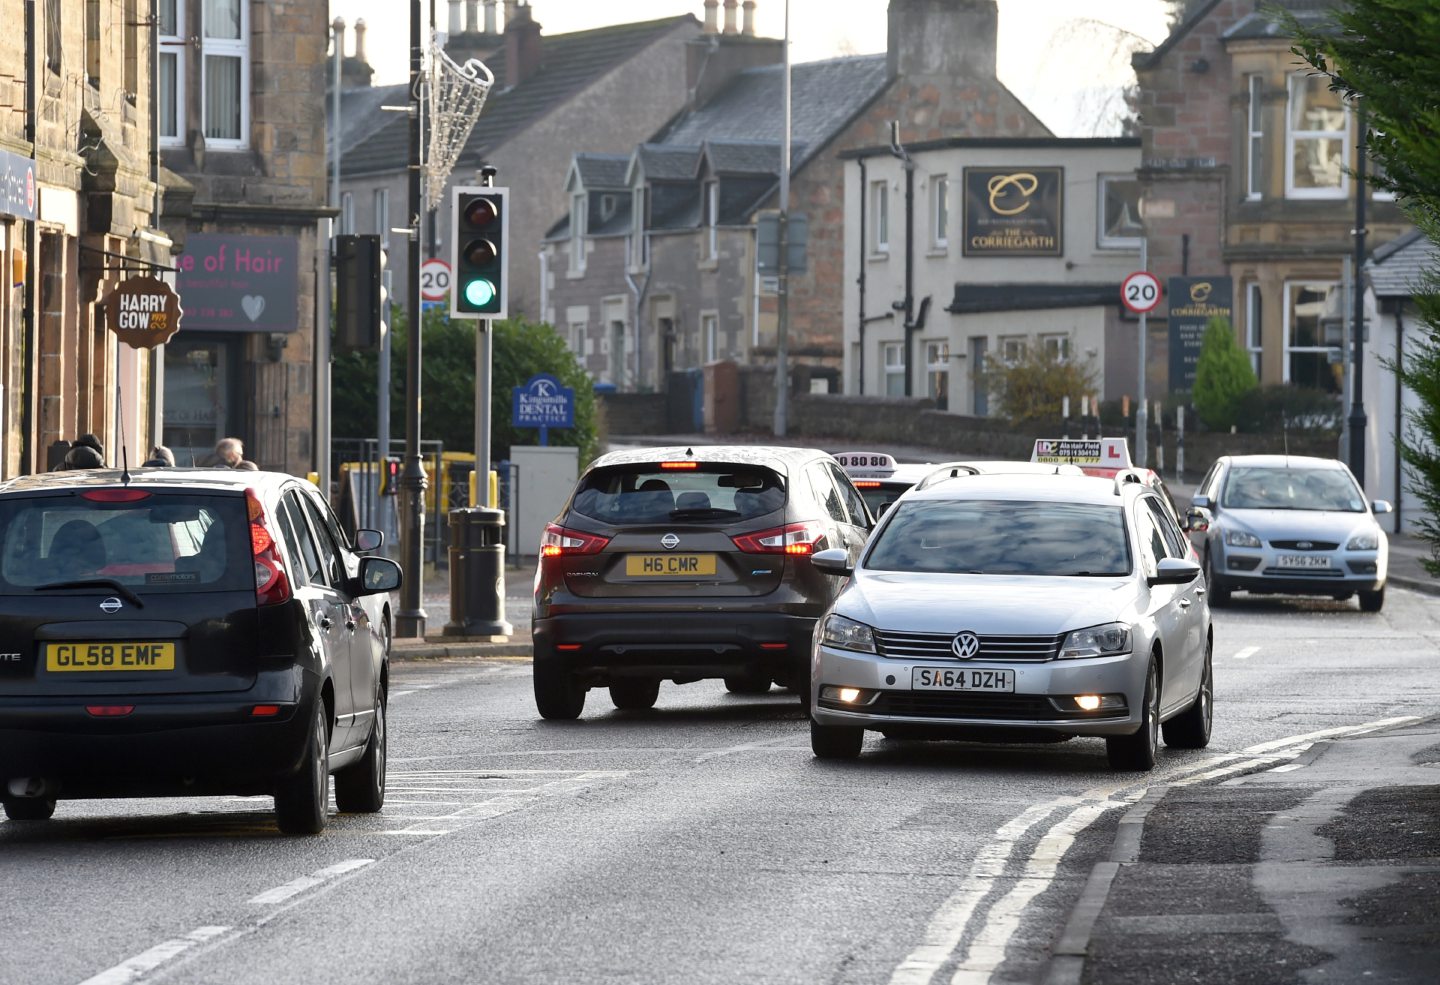 The proposals would cut traffic on Academy Street by around 80%. Image: Sandy McCook/DC Thomson